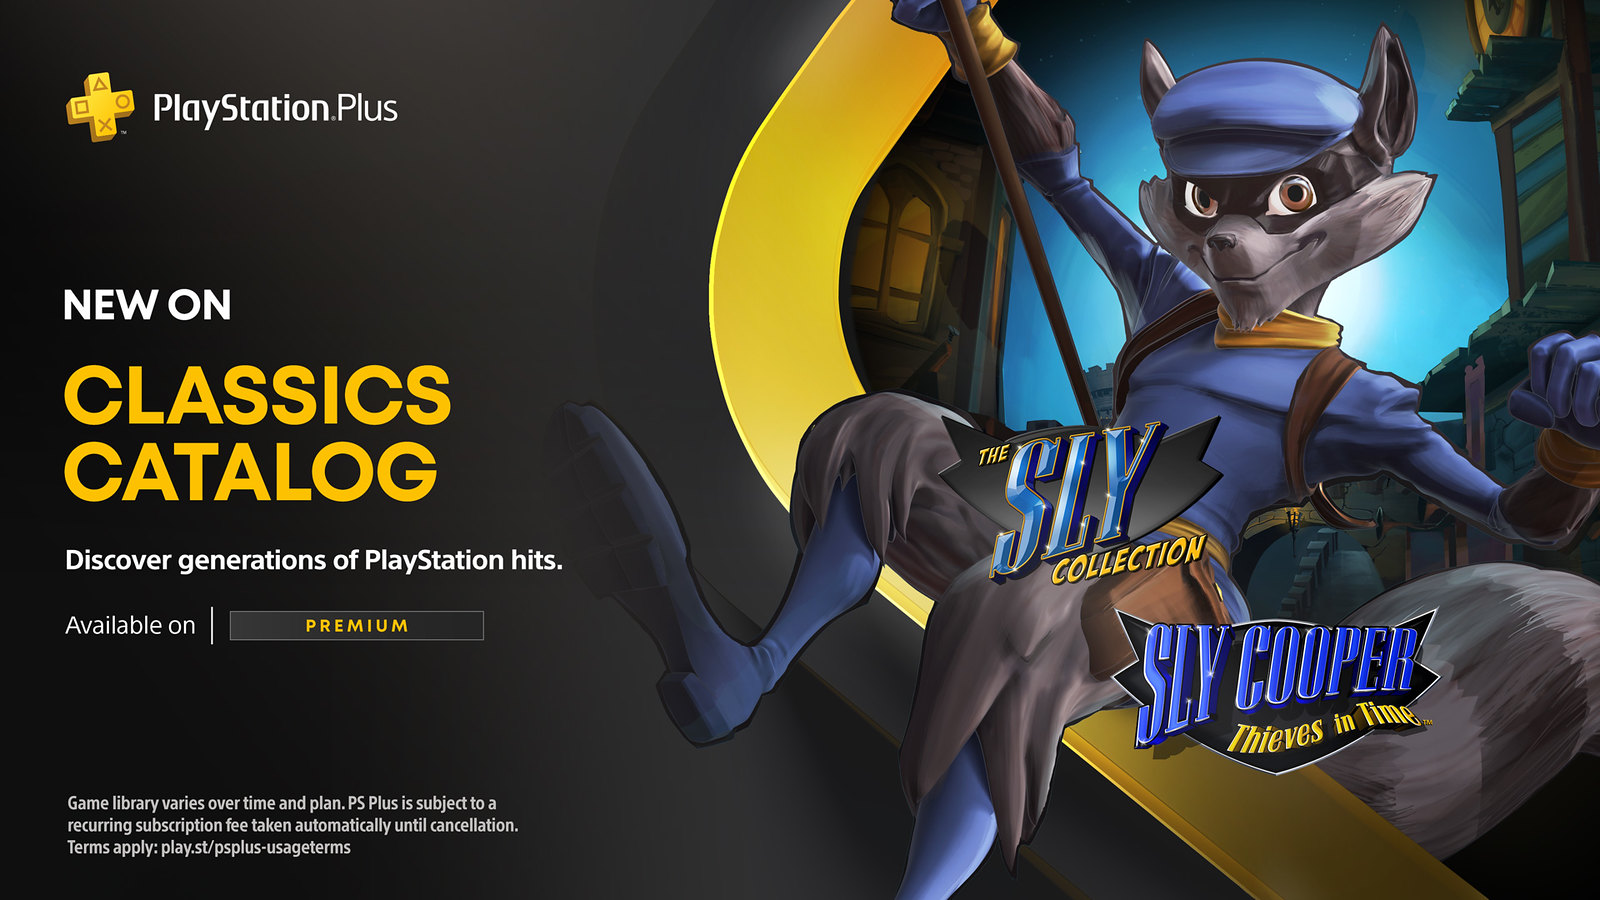 Sly Cooper celebrates 20 years today